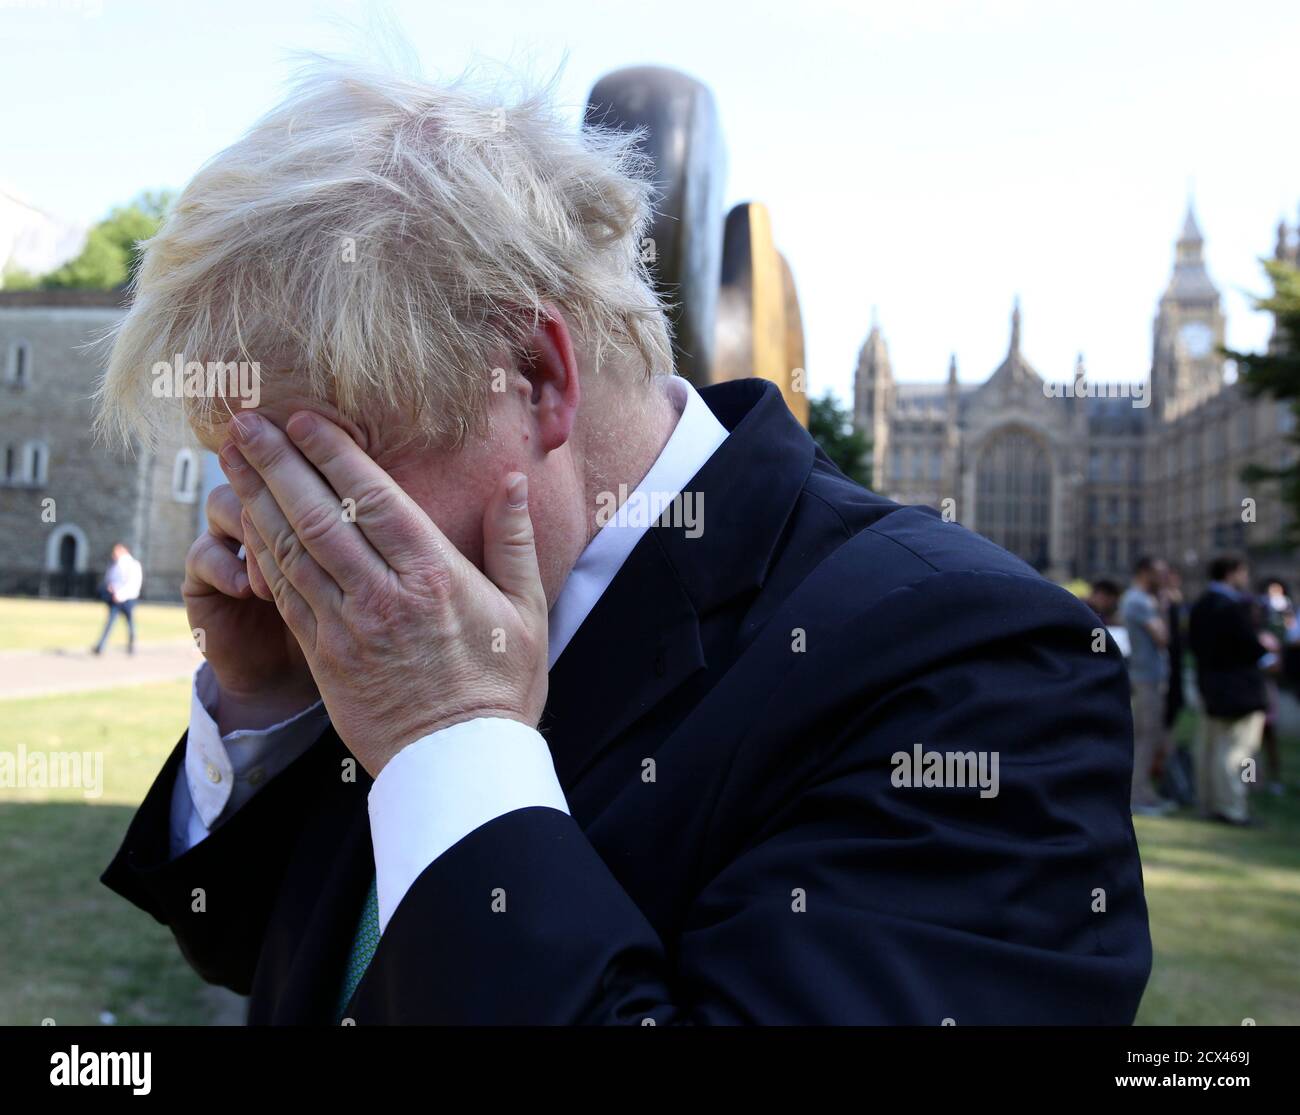 London Mayor Boris Johnson speaks on the phone as he gathers with other MPs who oppose the expansion of Heathrow airport, in central London, Britain July 1, 2015.  Johnson dismissed a proposal on Wednesday to expand Heathrow Airport as undeliverable and piled pressure on Prime Minister David Cameron to reject the plan, setting the scene for a protracted political dispute. The government-appointed Airports Commission earlier recommended a third runway be built at Heathrow to add urgently required capacity, proposing a package of measures to mitigate the noise and environmental impact.  REUTERS/ Stock Photo